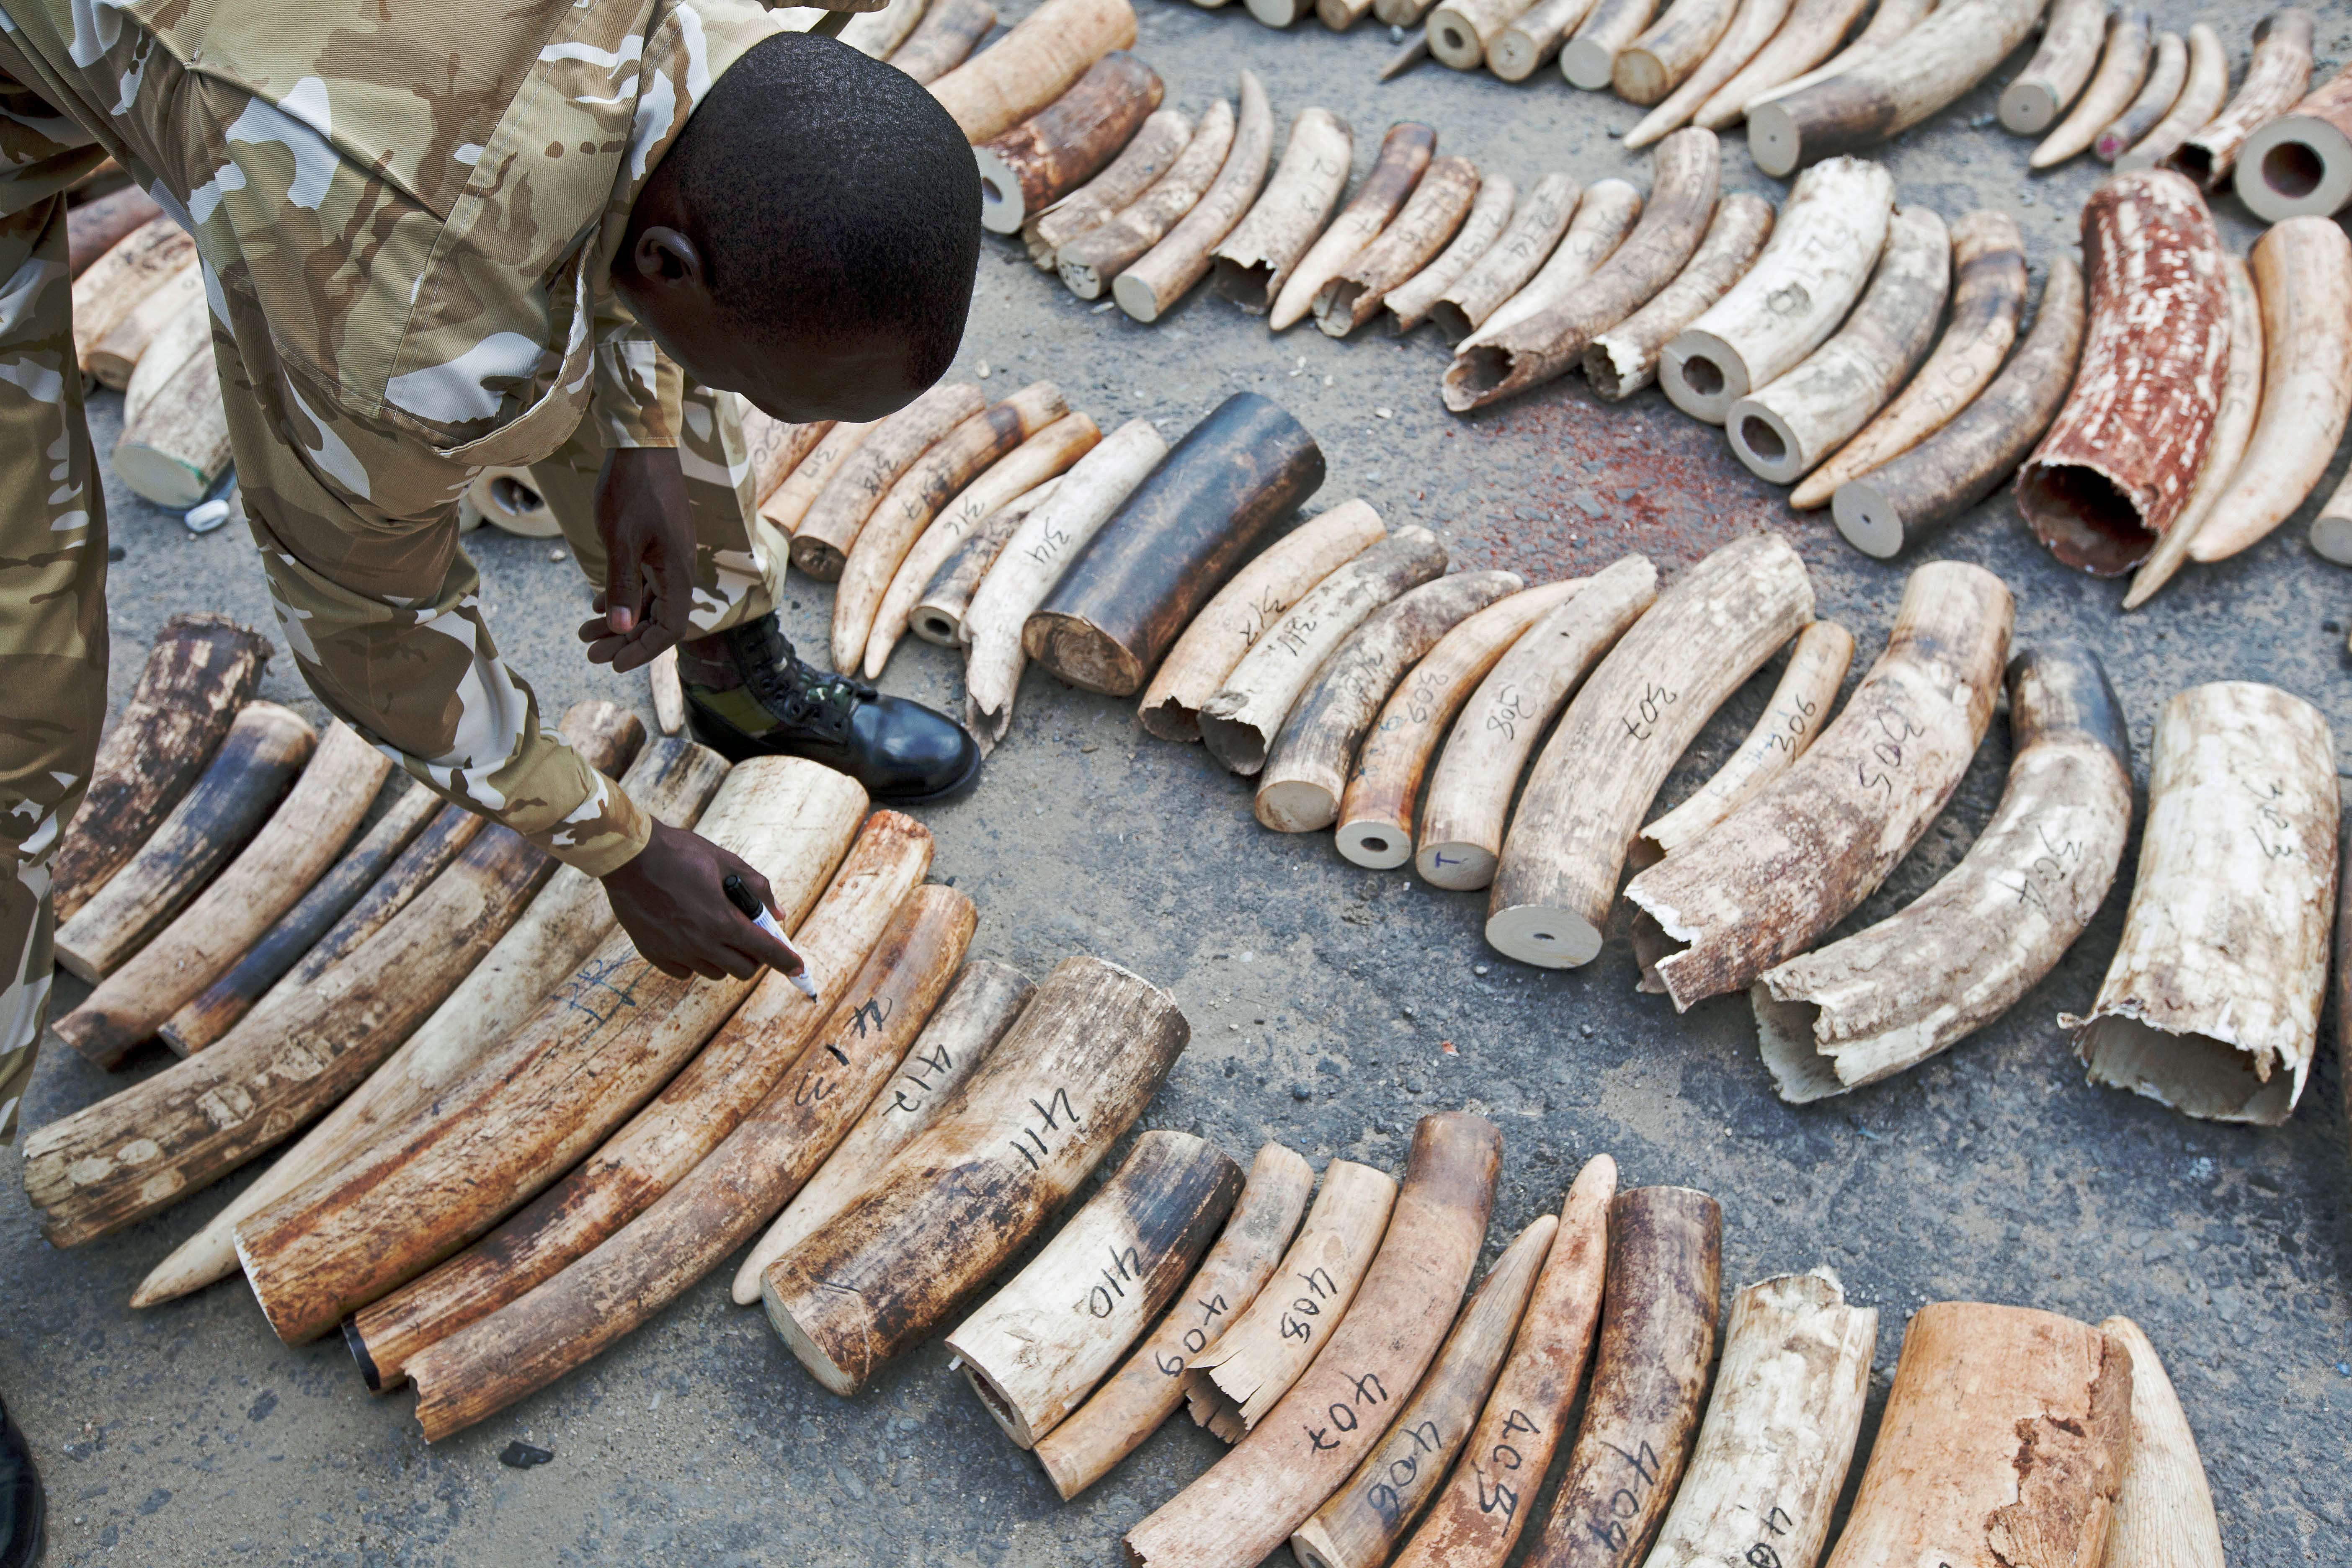 Ivory is not for sale, not now and not in the future